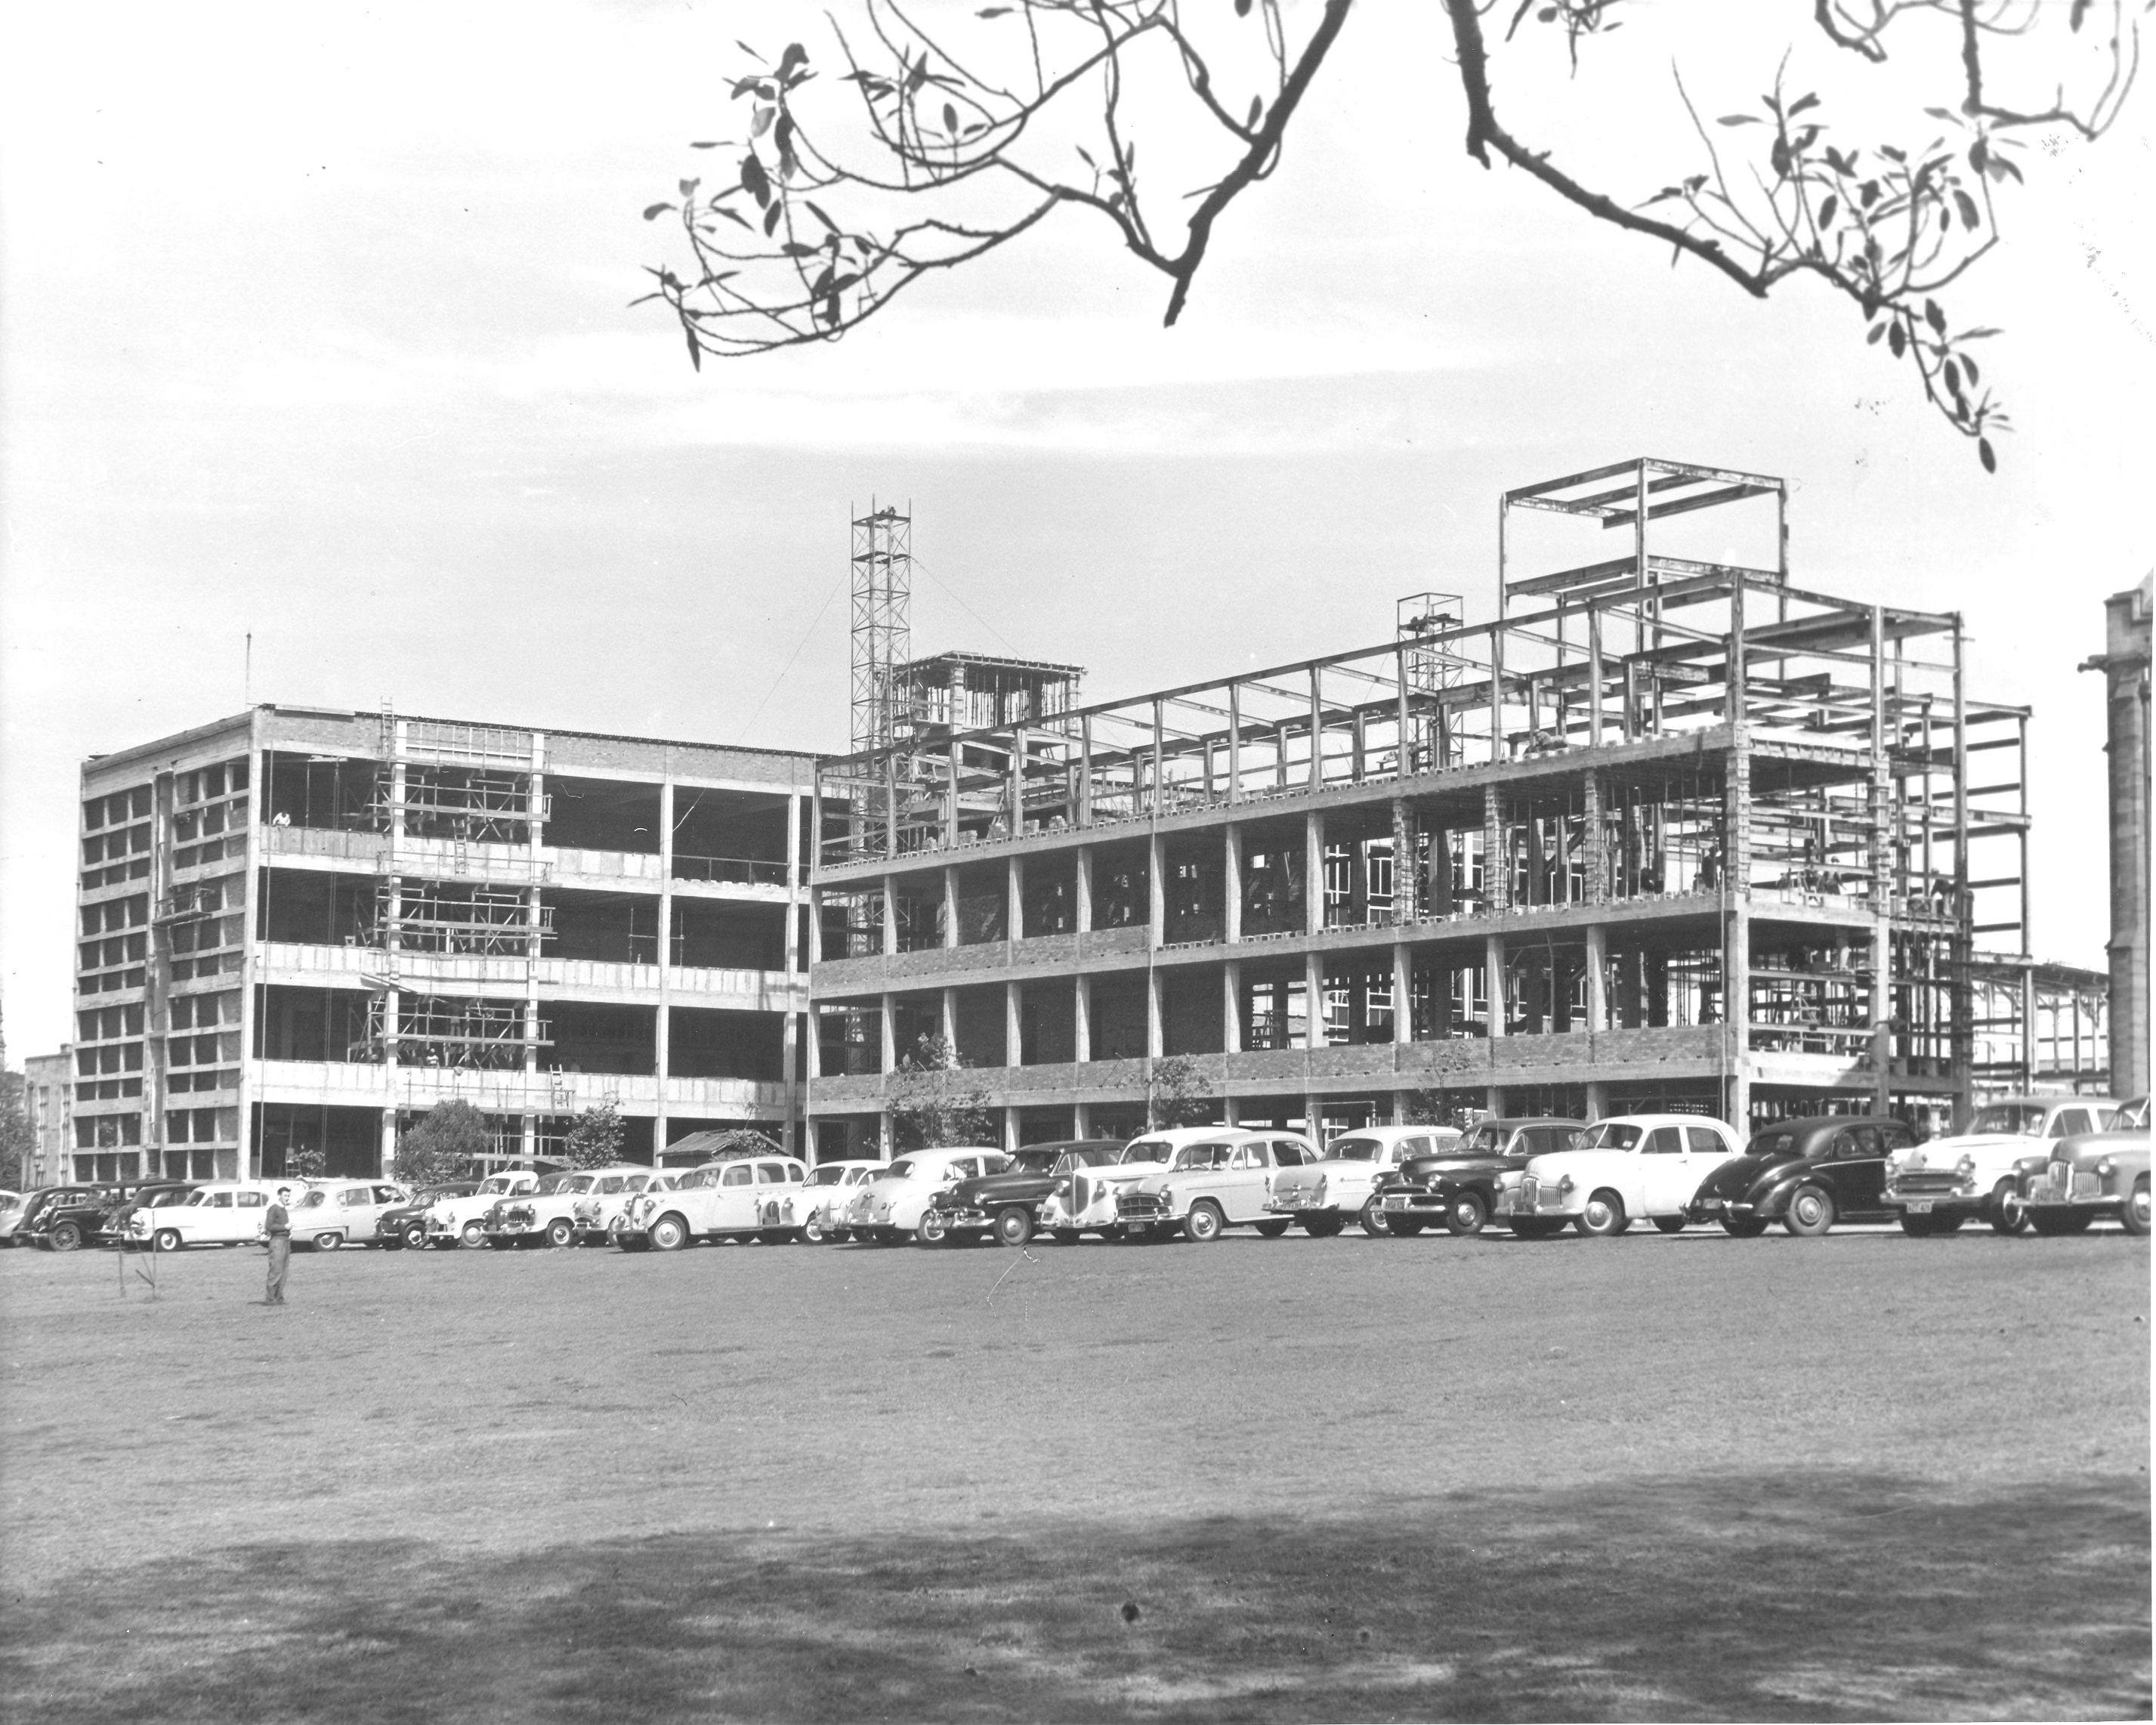 CHEMISTRY BUILDING BEING CONSTRUCTED